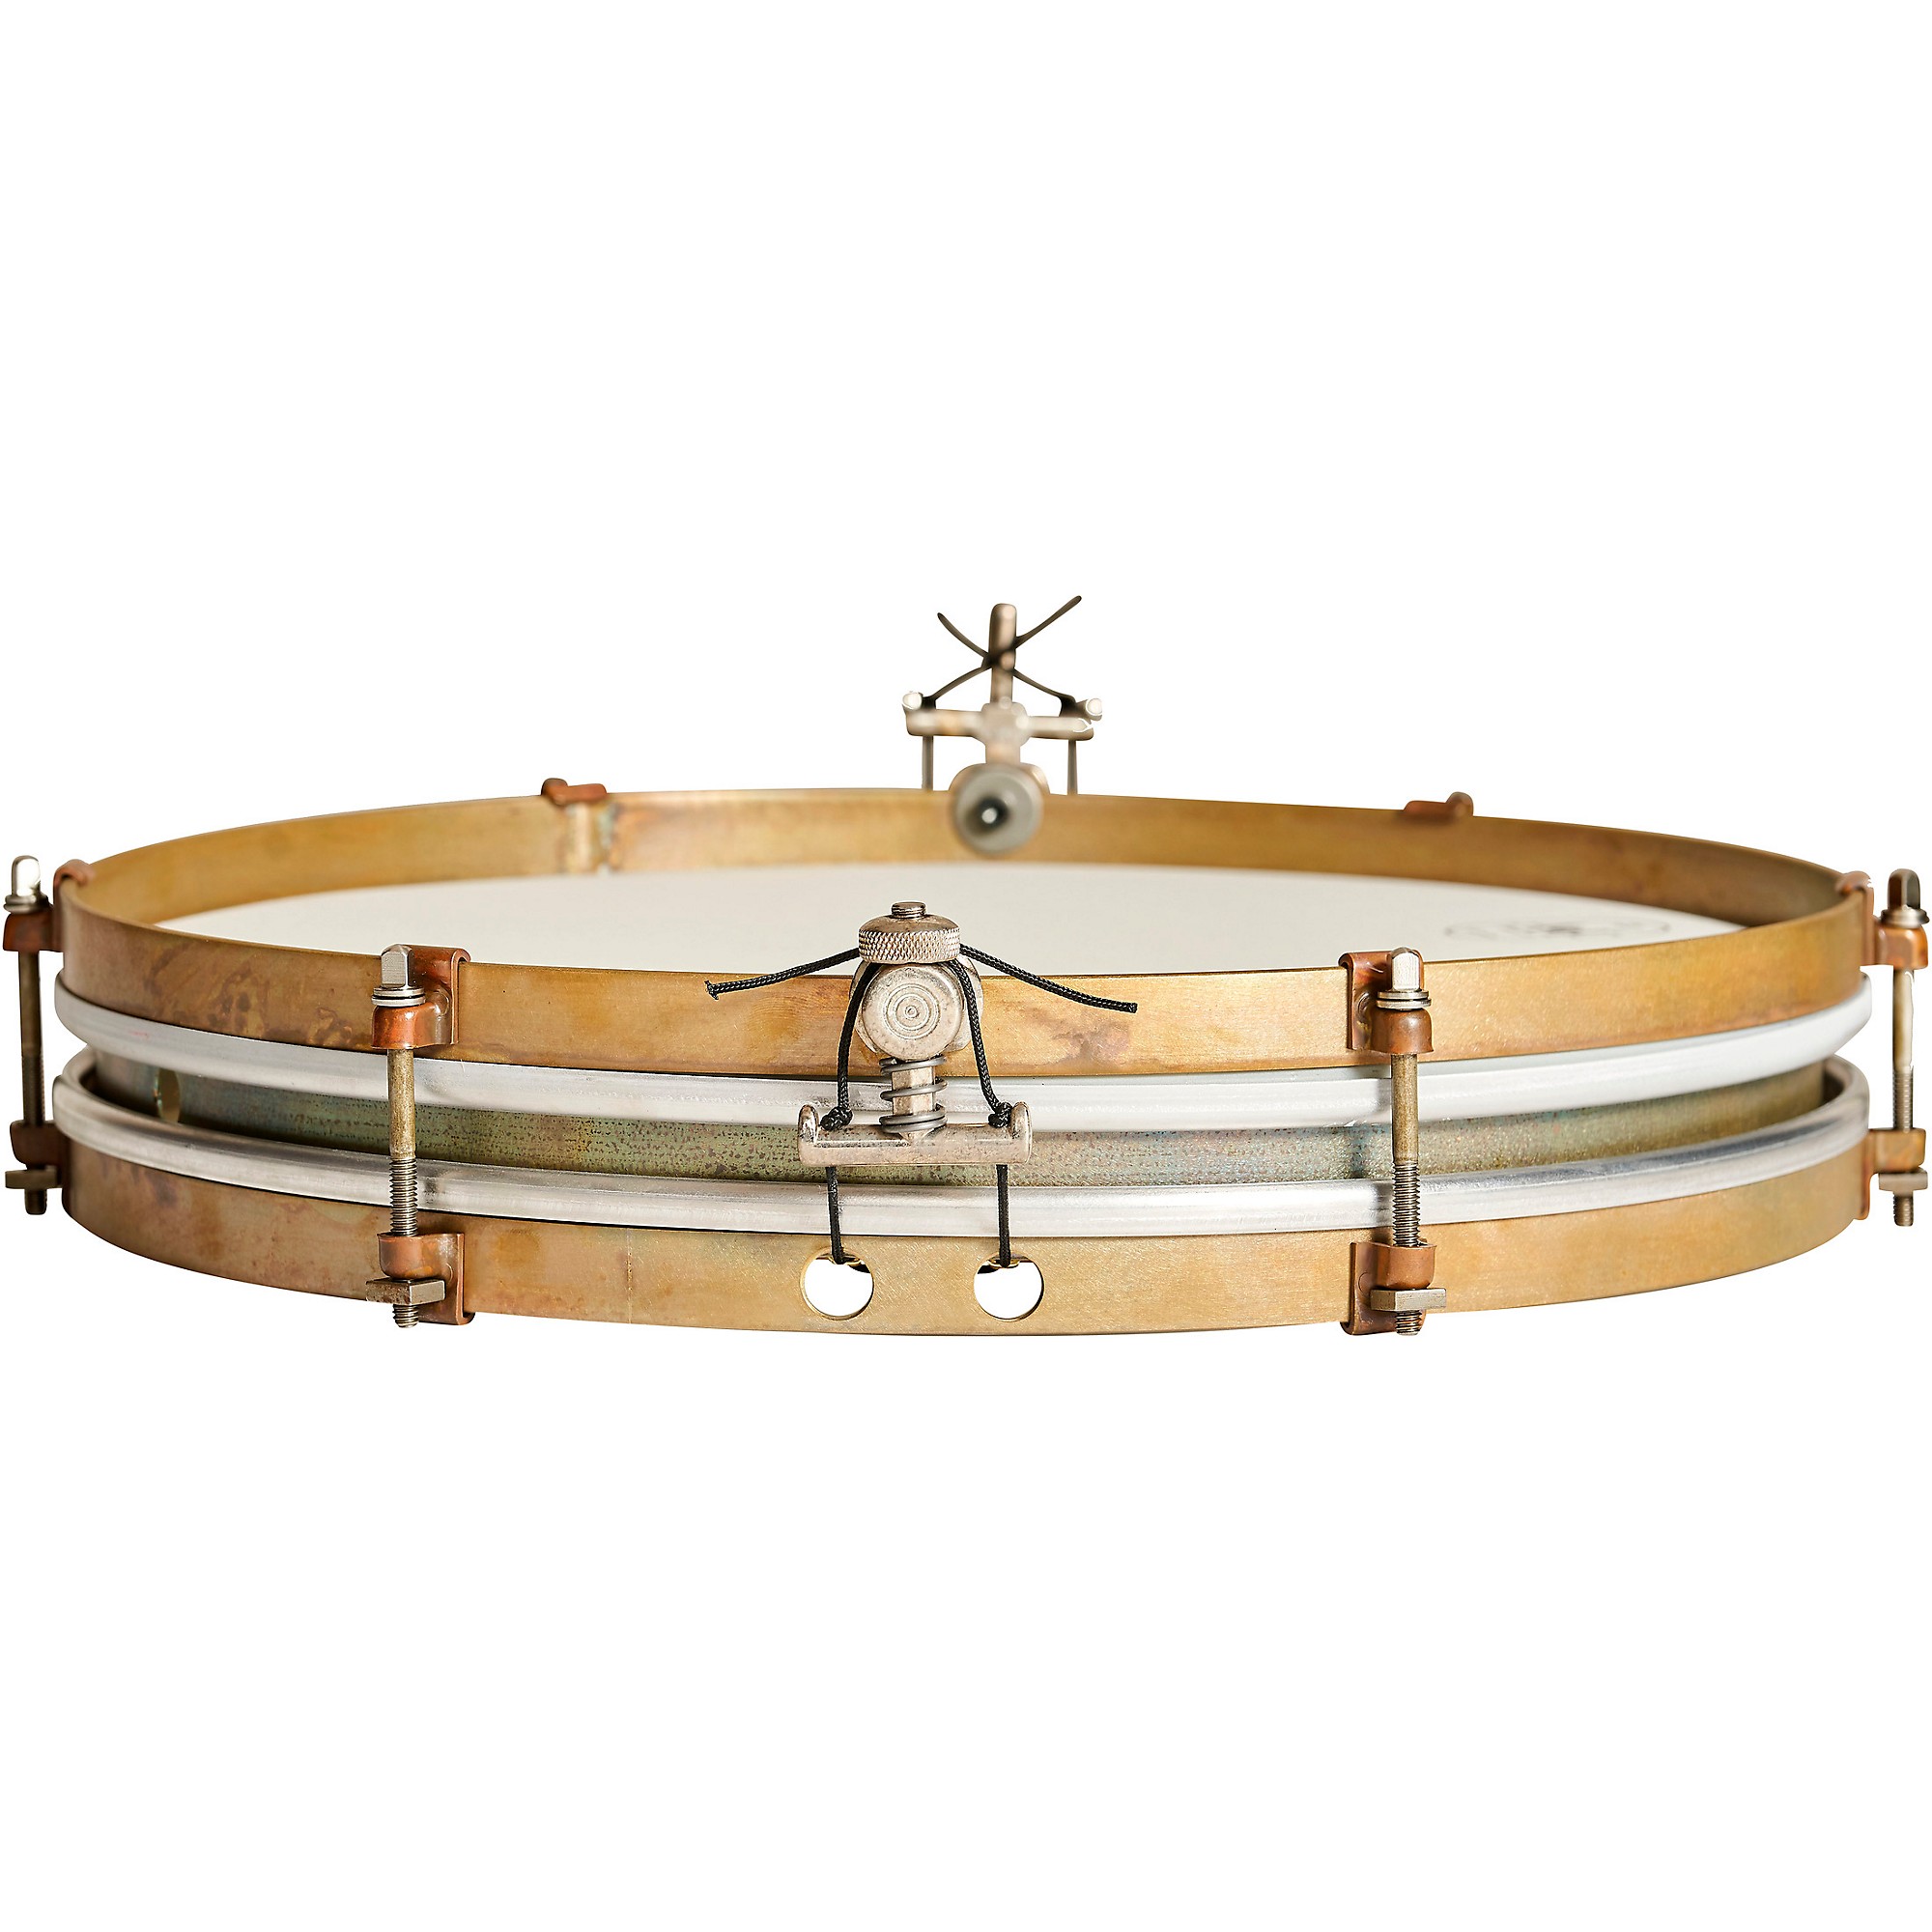 A&F Drum Co Pancake Brass Snare 14 x 1.5 in. | Guitar Center